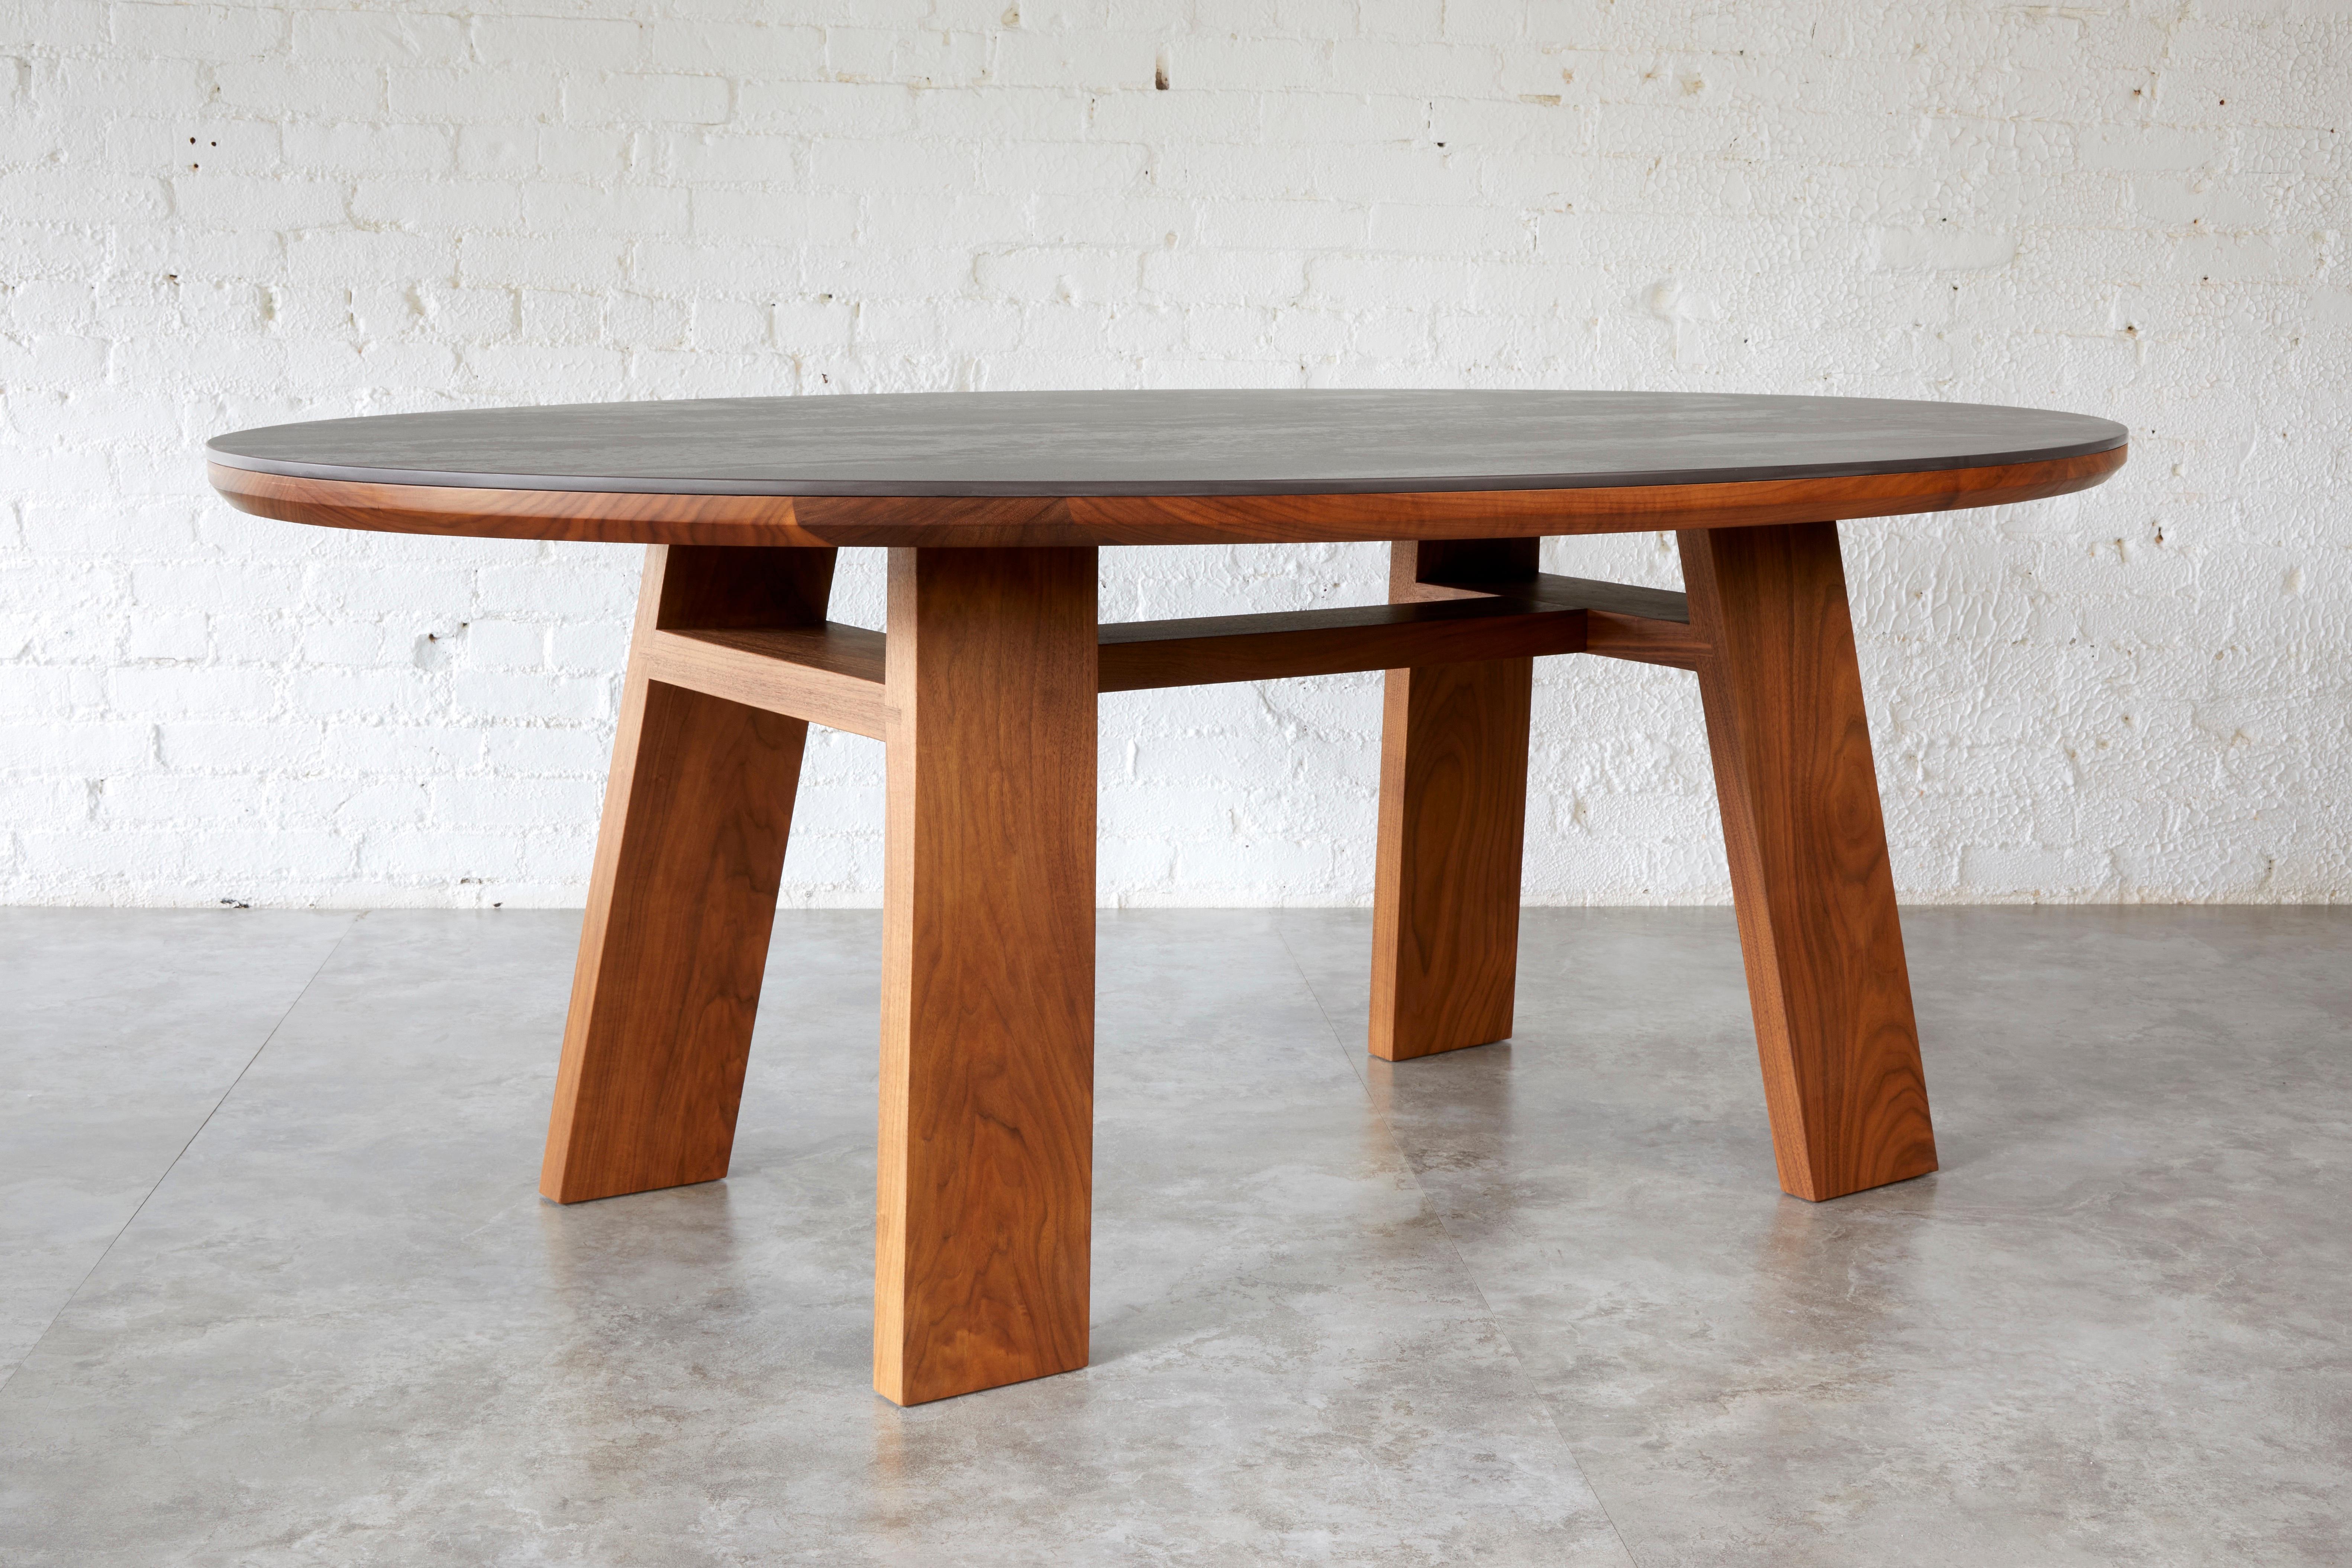 The Nieves table combines natural materials from two elements wood and stone to create an elevated table that stimulates the senses. Starting with solid wood that is sourced as close to home as possible, our designer Kirk Van Ludwig of Autonomous